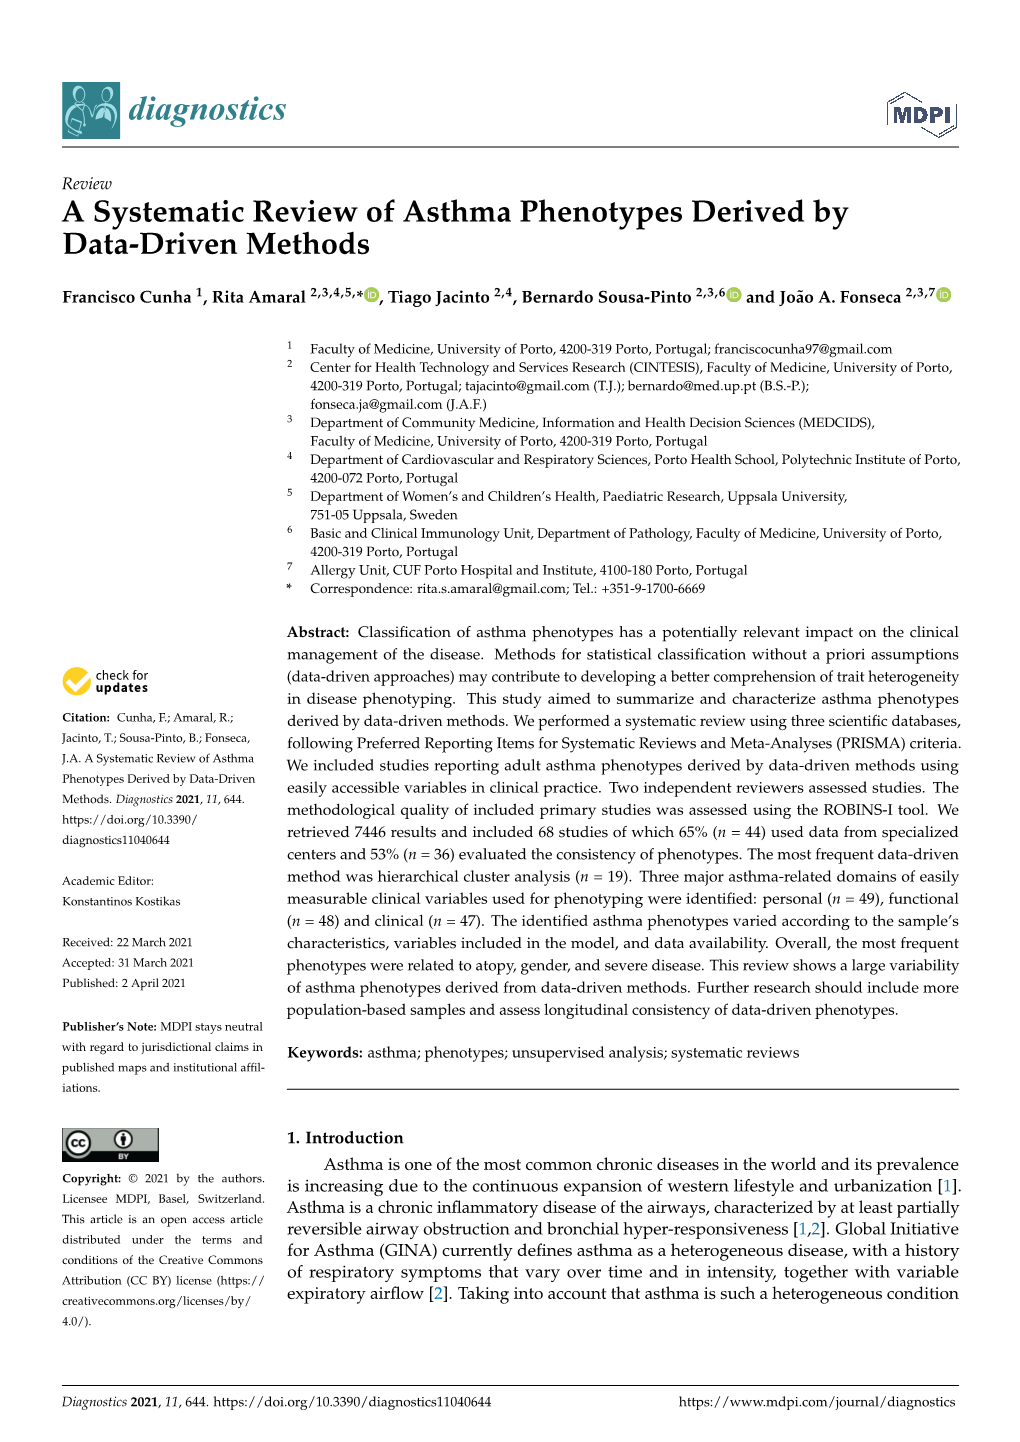 A Systematic Review of Asthma Phenotypes Derived by Data-Driven Methods